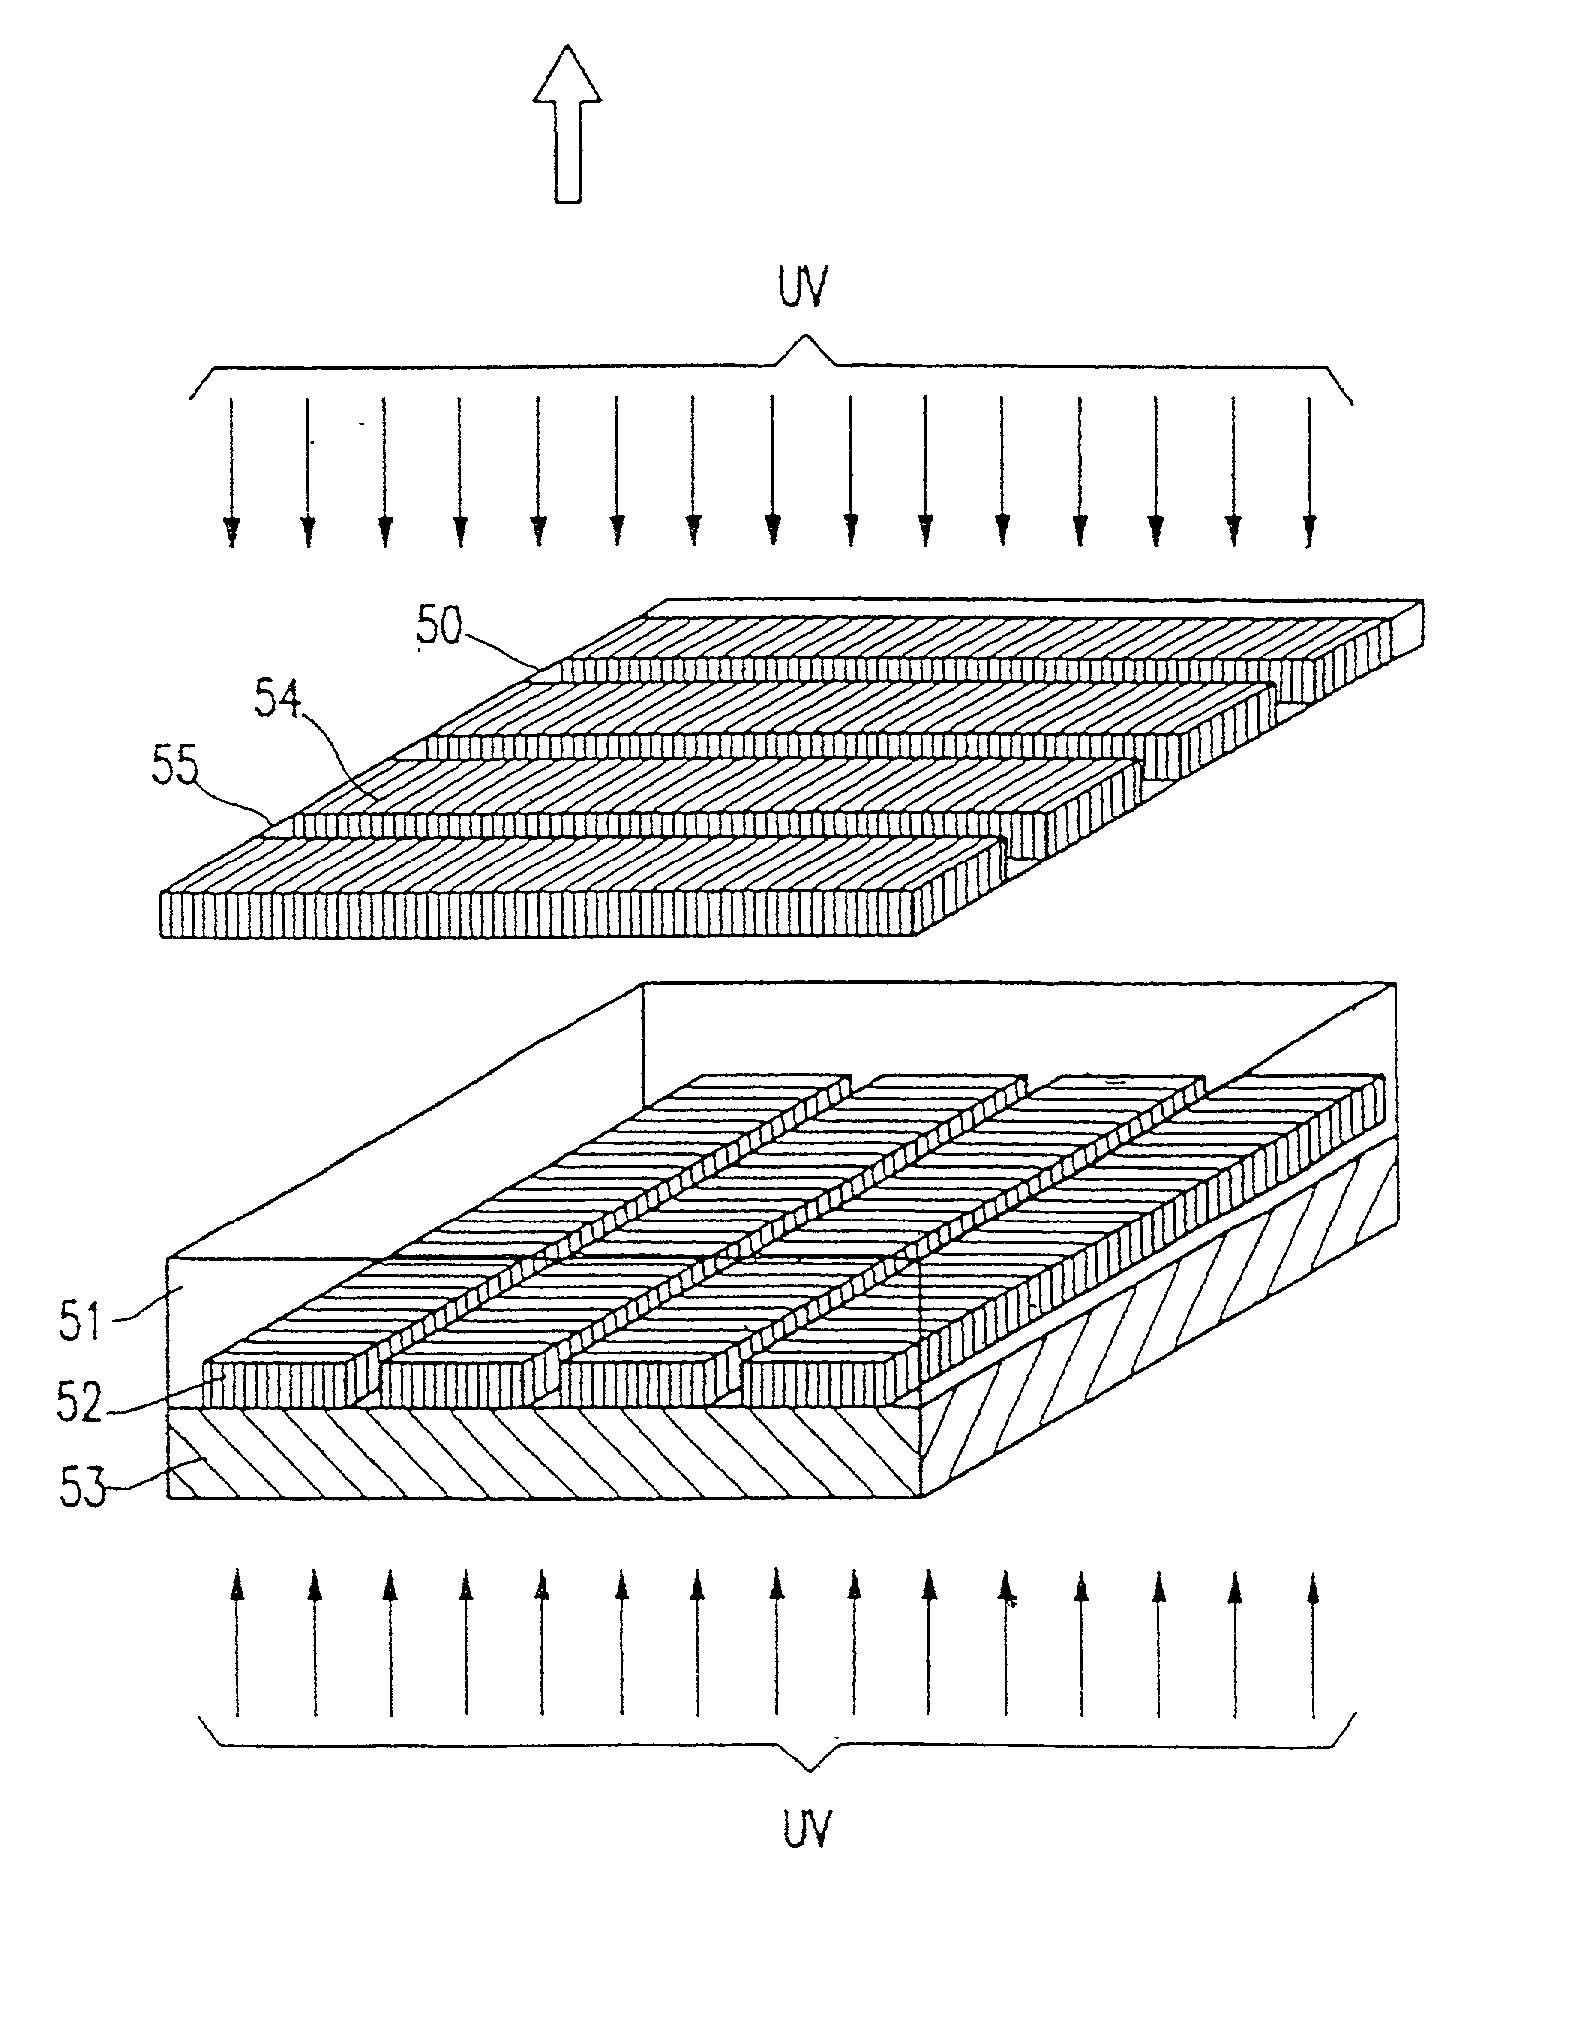 Transmissive or reflective liquid crystal display and novel process for its manufacture